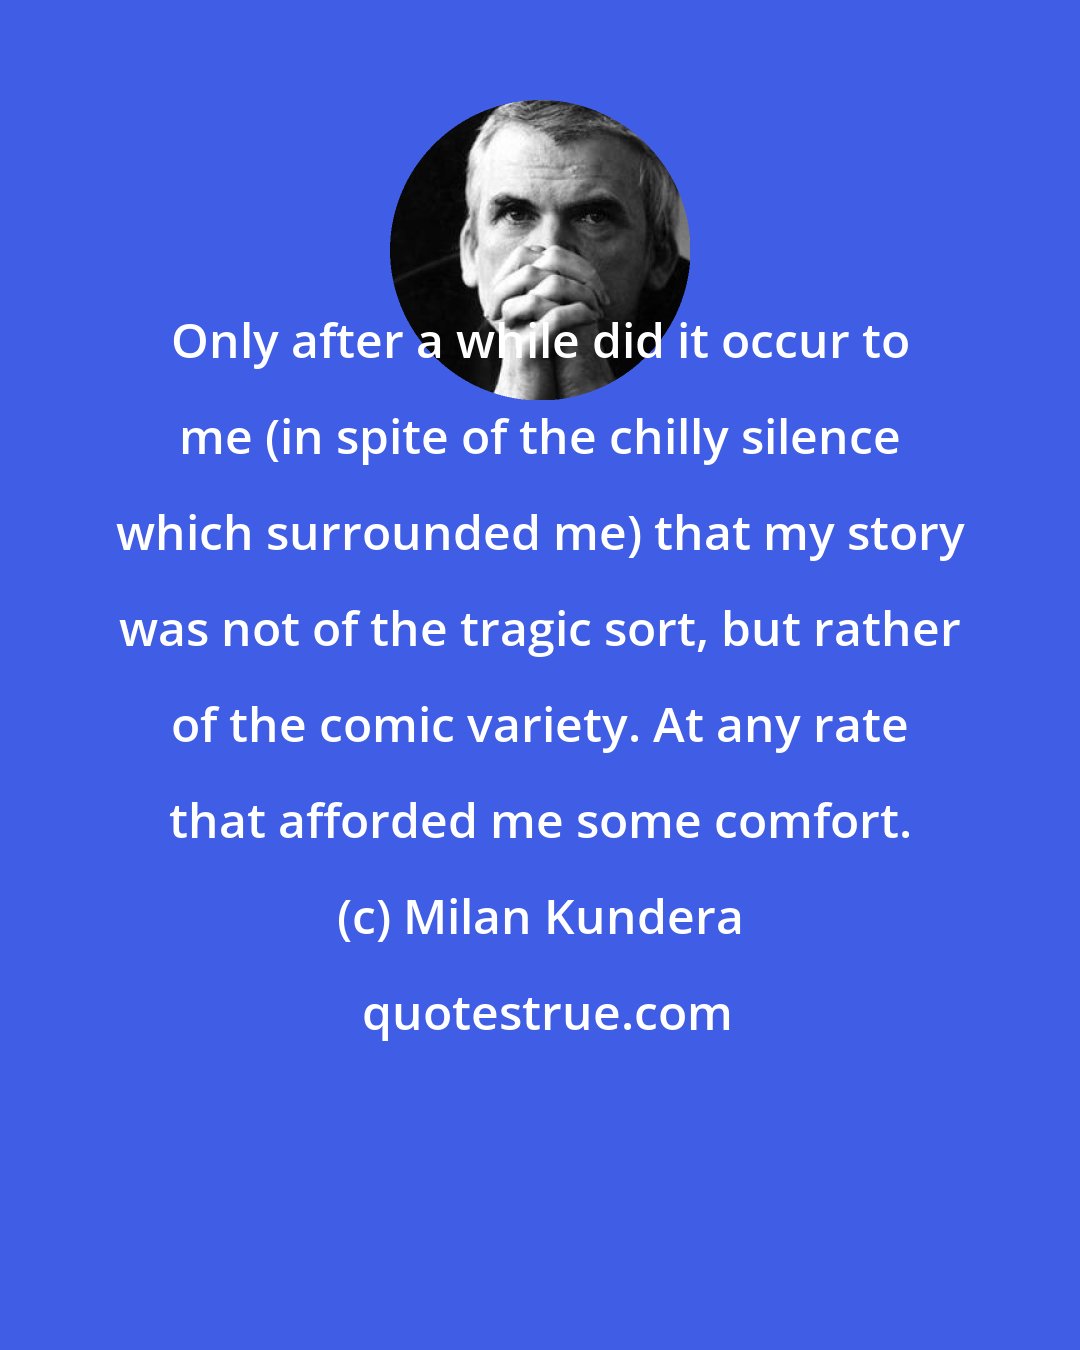 Milan Kundera: Only after a while did it occur to me (in spite of the chilly silence which surrounded me) that my story was not of the tragic sort, but rather of the comic variety. At any rate that afforded me some comfort.